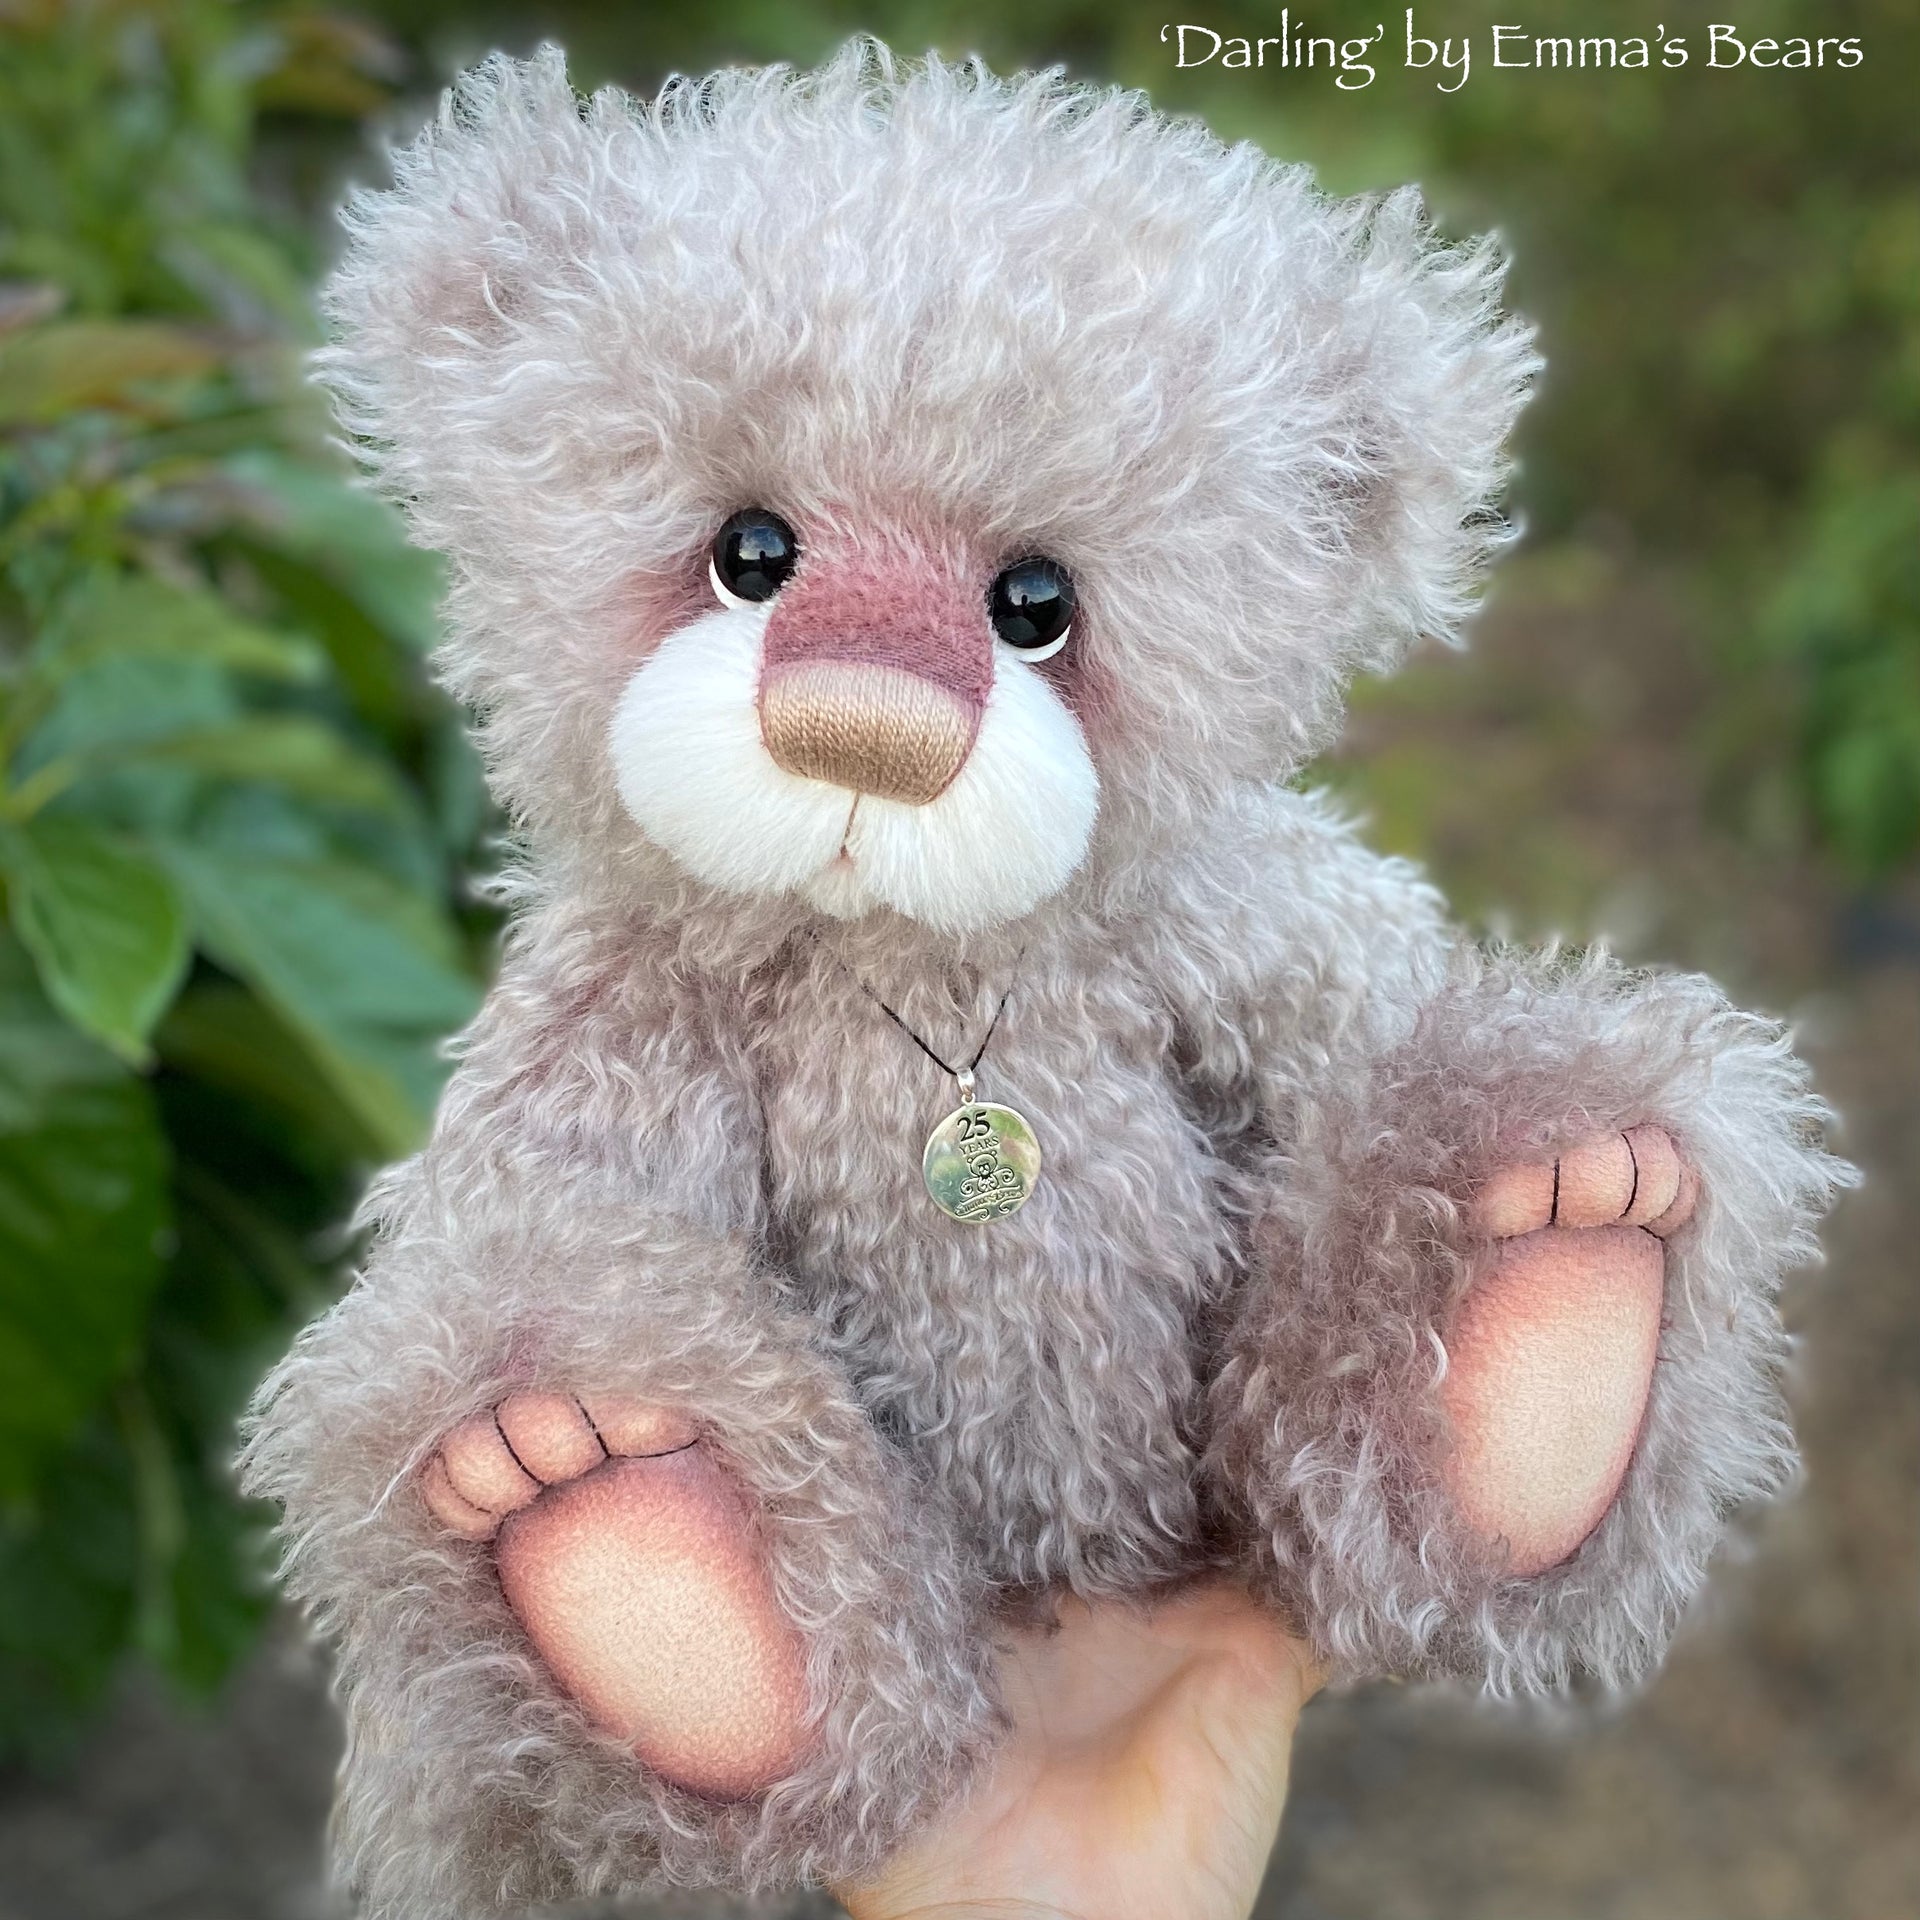 Darling - 16" SPECIAL 25th Anniversary Collection Hand-dyed mohair Artist Bear by Emmas Bears - OOAK